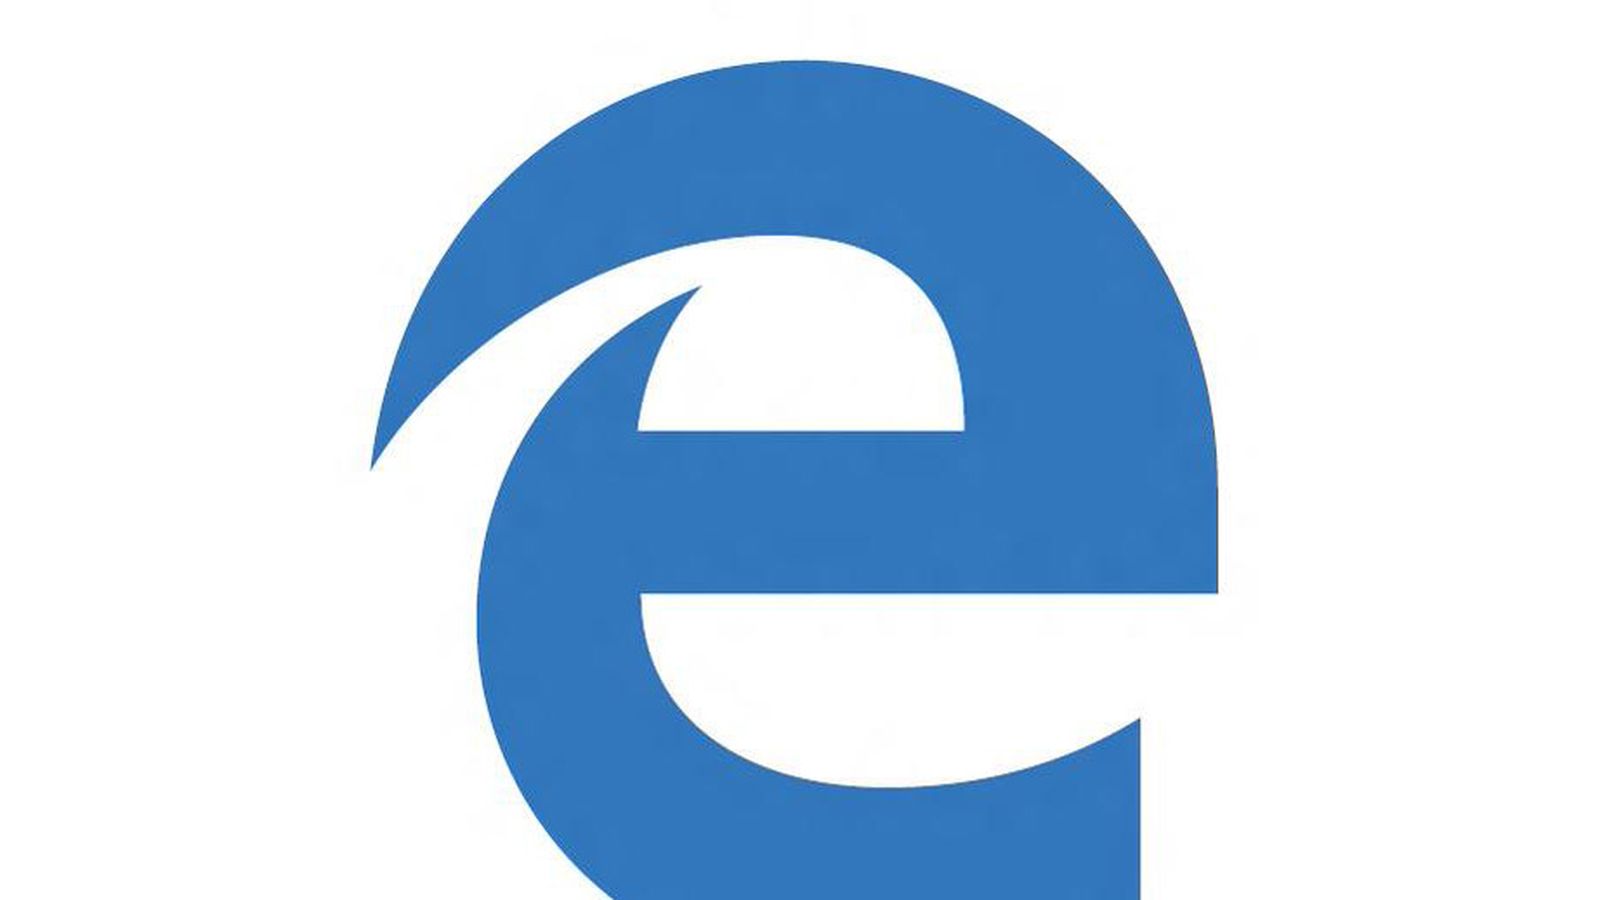 Microsoft S Edge Logo Clings To The Past